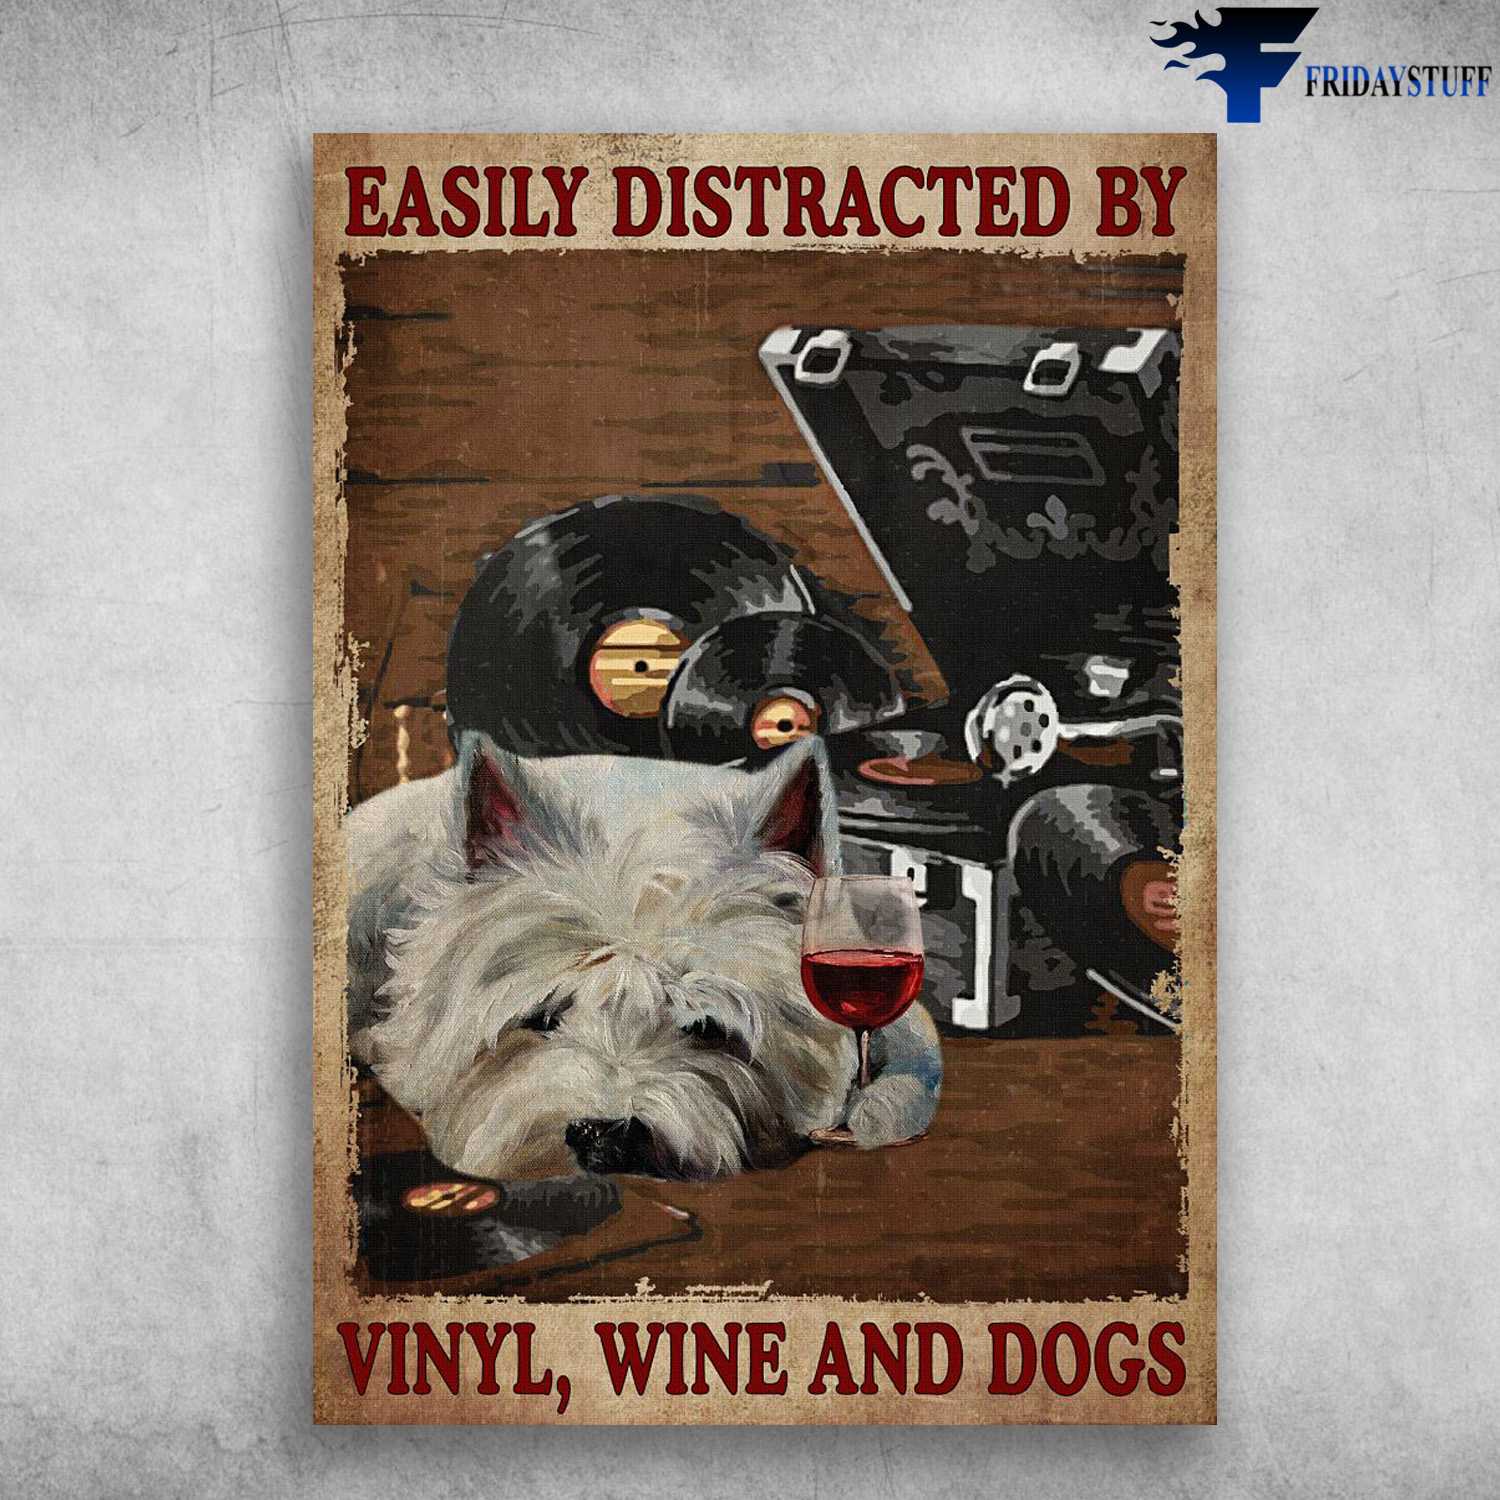 Vinyl Poster, Dog Lover, Music And Wine, Easily Distracted Vinyl, Wine And Dogs - FridayStuff